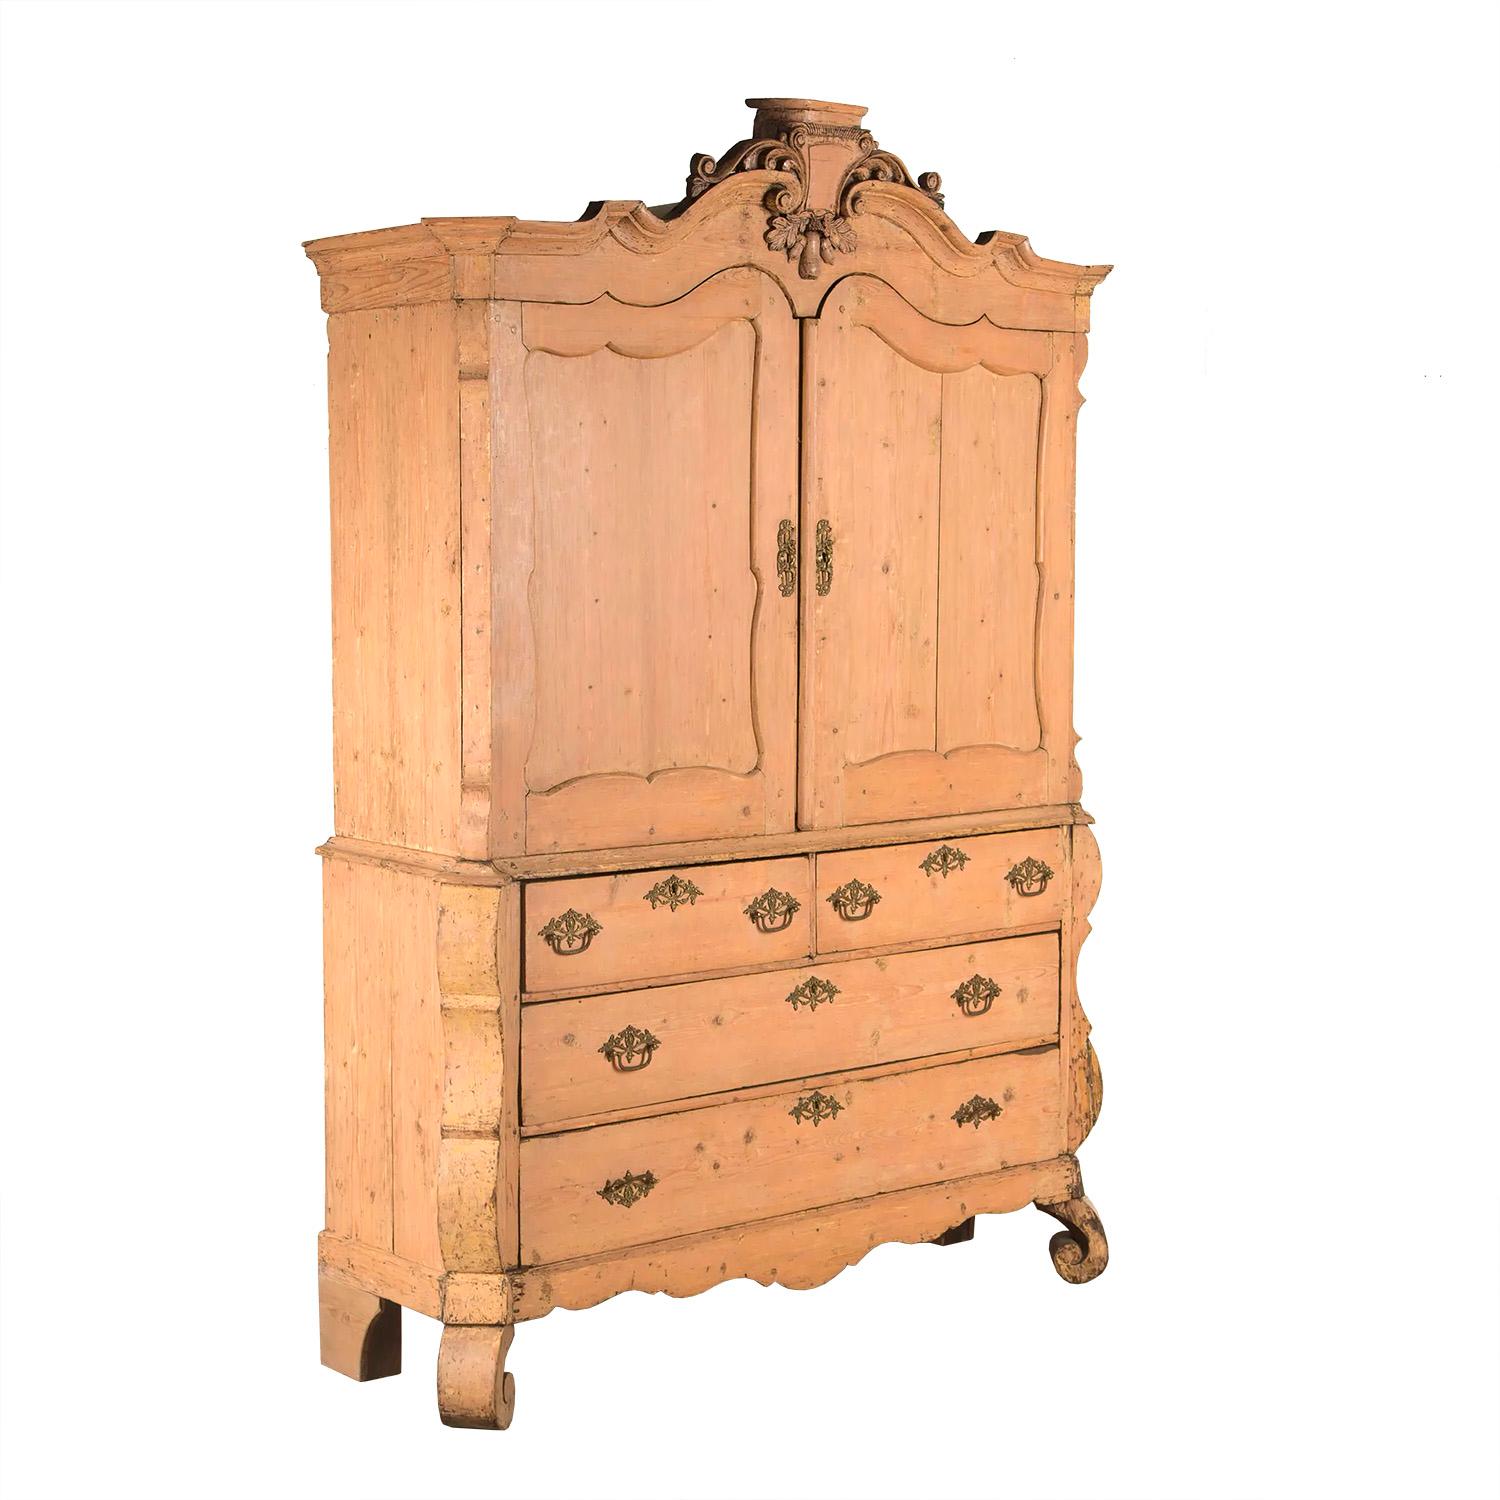 A two part Dutch country pine cabinet with decorative carved pediment featuring a cartouche and acorns with leaves. This piece features two doors opening to storage shelves with small drawers. The bottom section has two long and one two part